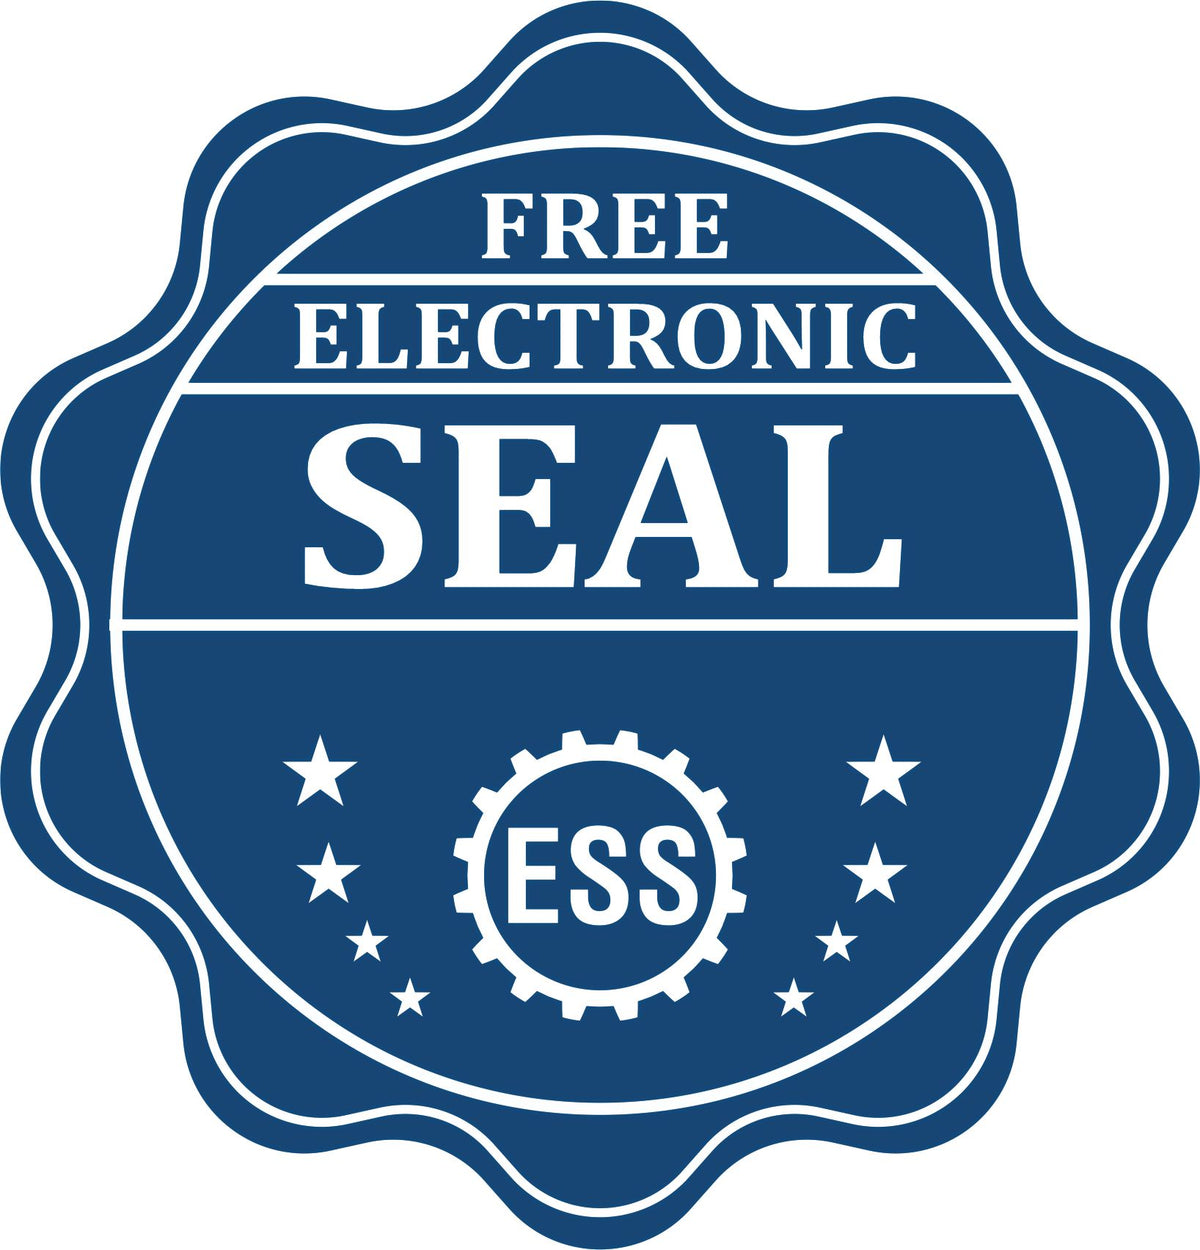 A badge showing a free electronic seal for the Hybrid North Dakota Land Surveyor Seal with stars and the ESS gear on the emblem.